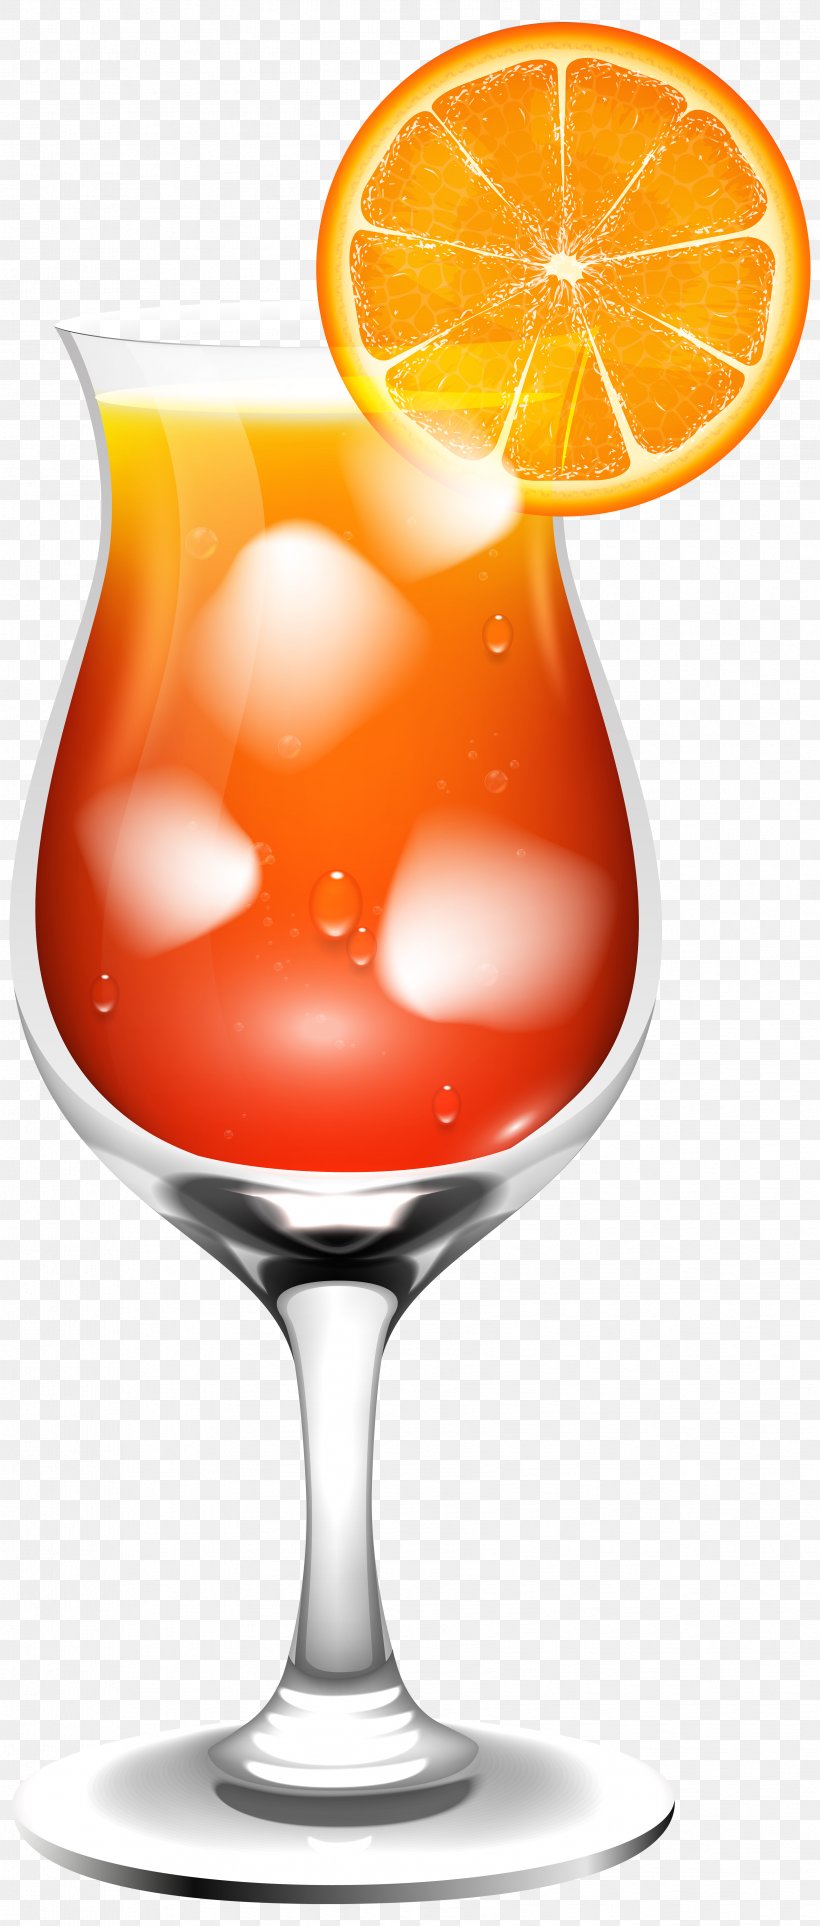 Cocktail Juice Martini Punch Clip Art, PNG, 3406x8000px, Cocktail, Cocktail Garnish, Cocktail Party, Cocktail Shaker, Cocktail Umbrella Download Free